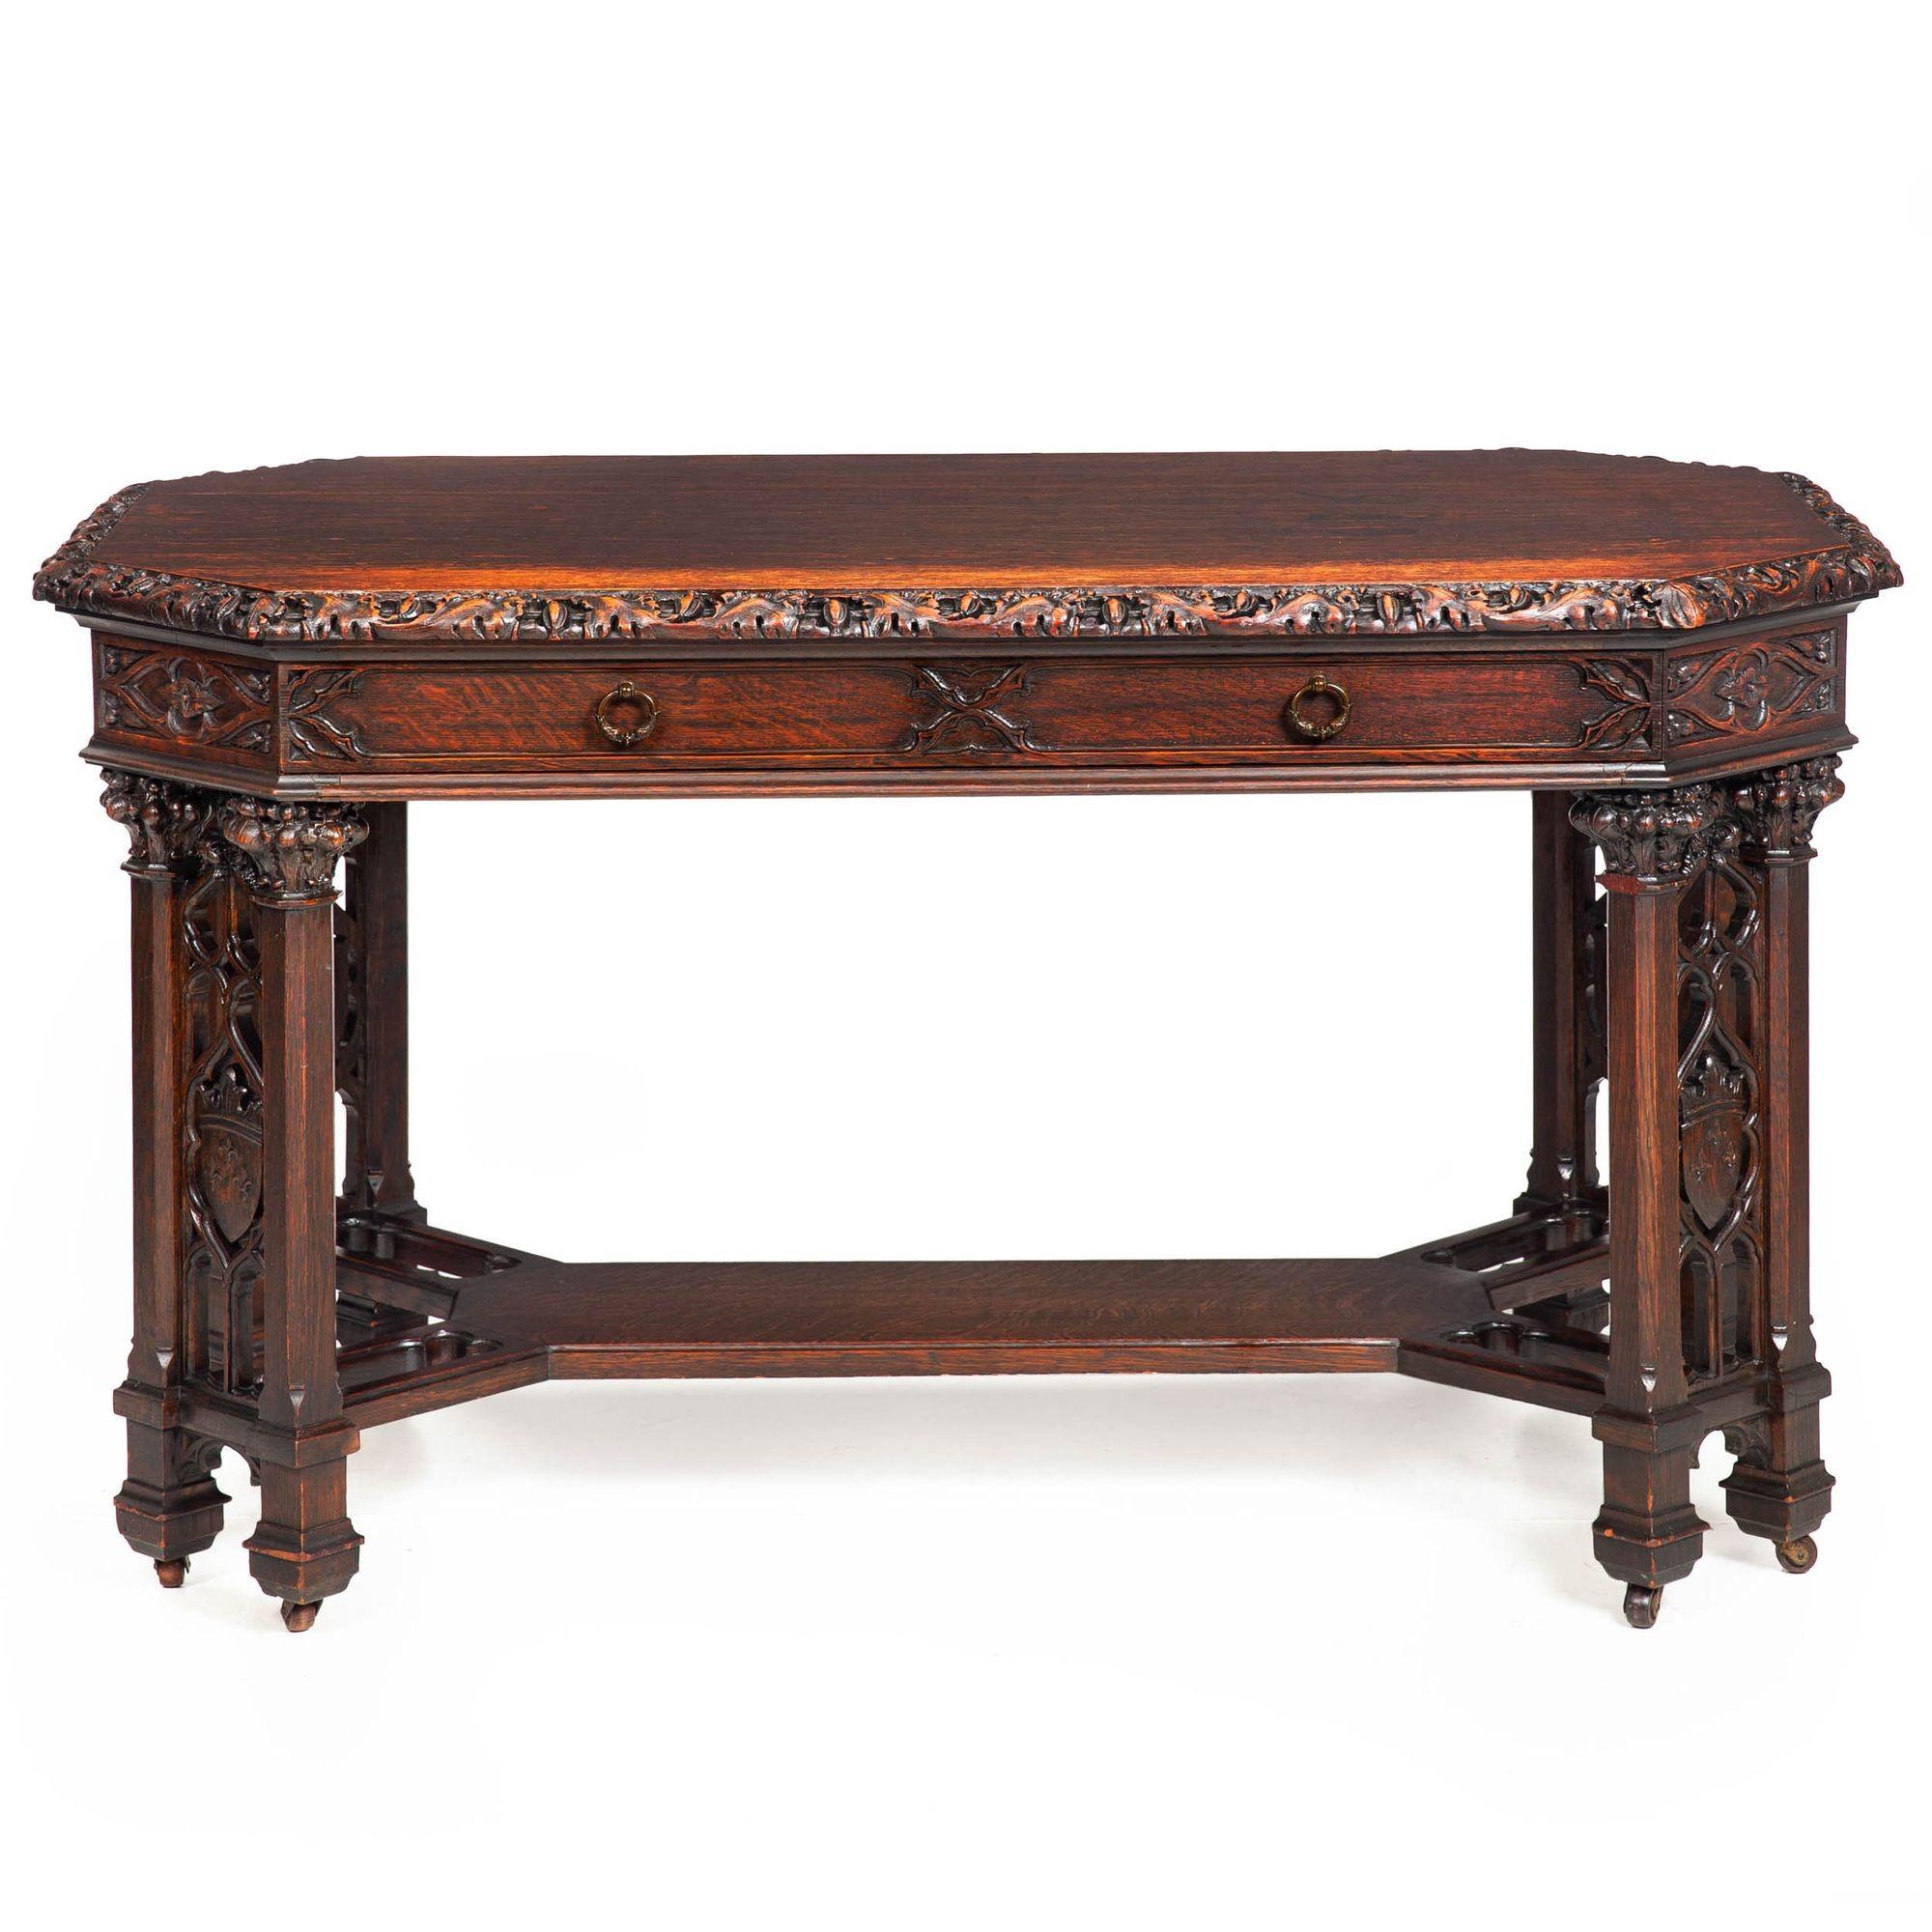 NEO-GOTHIC CARVED OAK-LEAF WRITING TABLE
England, ca. 1880
Item # 311PZH09A

A brilliant library writing table from the last quarter of the 19th century, this vividly carved and intelligently conceived design features primary surfaces of oak and oak